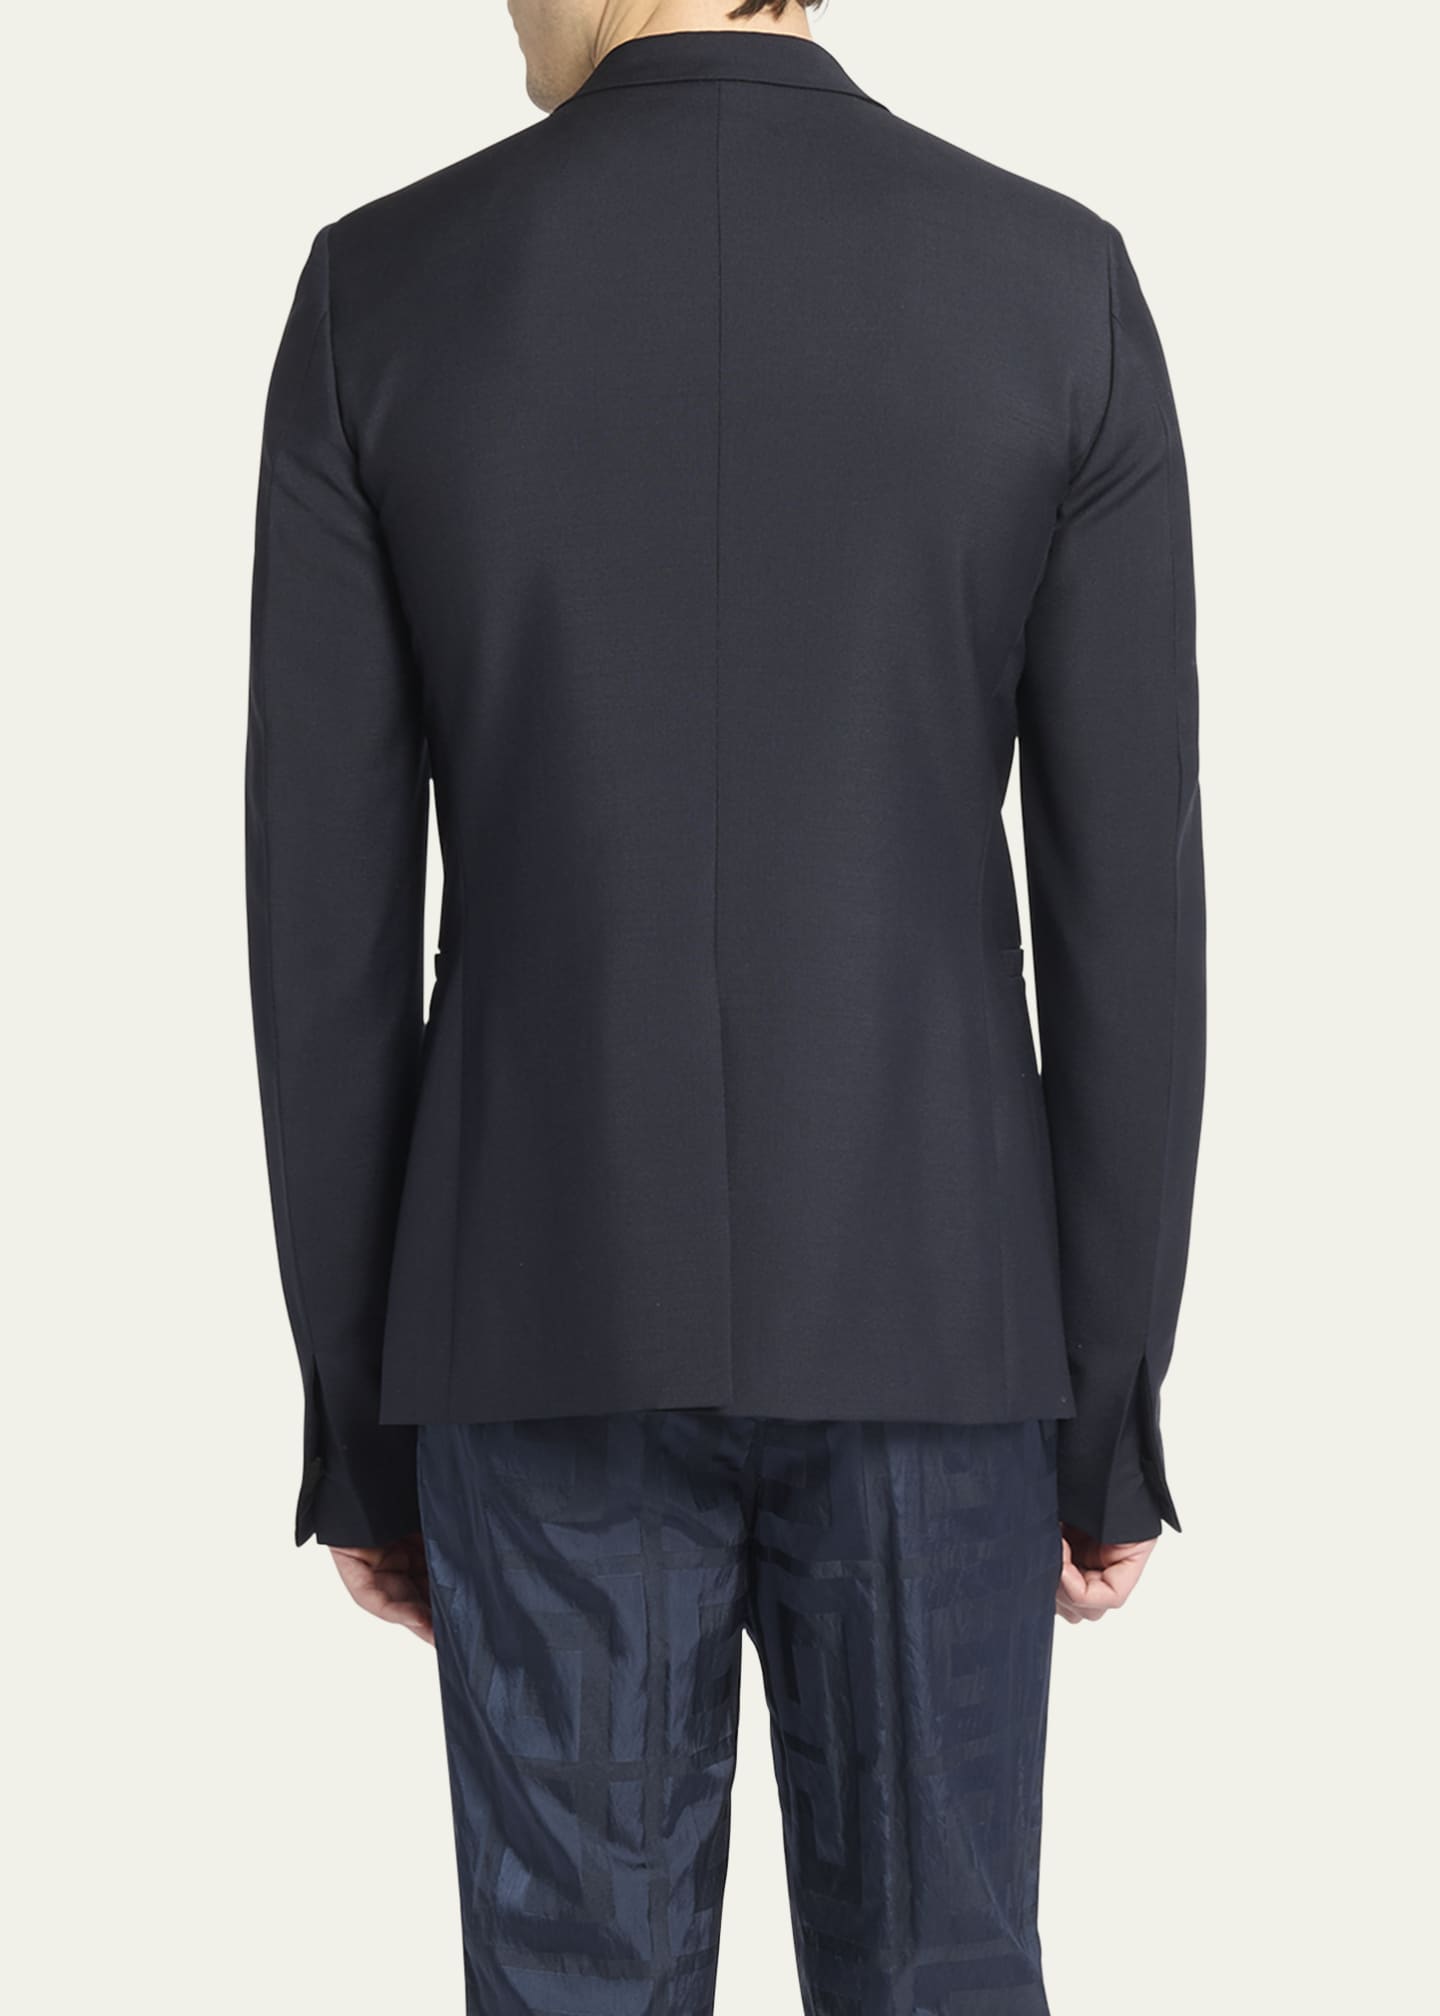 Givenchy Men's Evening Jacket with Metal Clip Closure